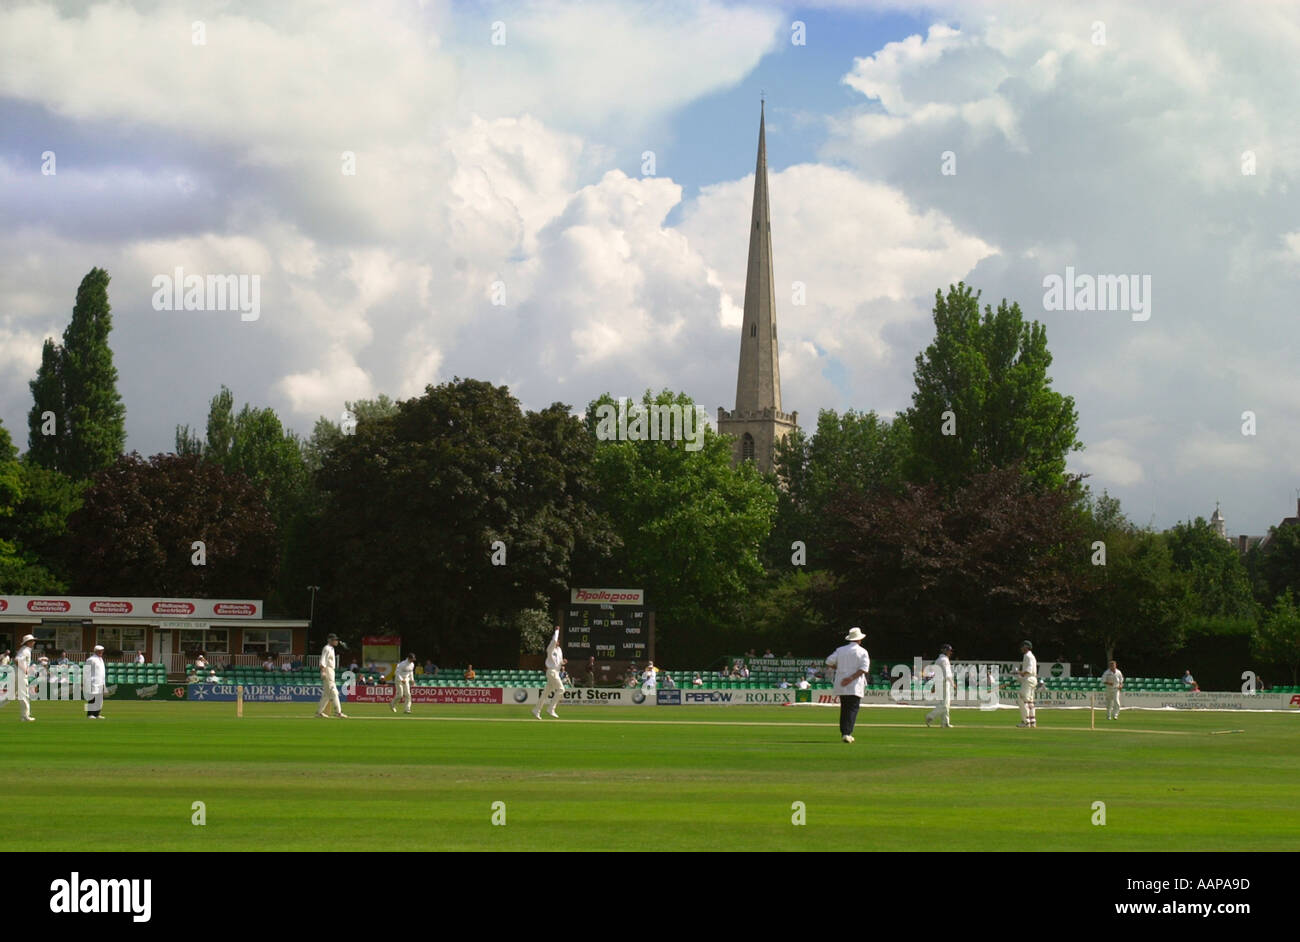 CRICKET AT THE COUNTY GROUND WORCESTERSHIRE UK Stock Photo